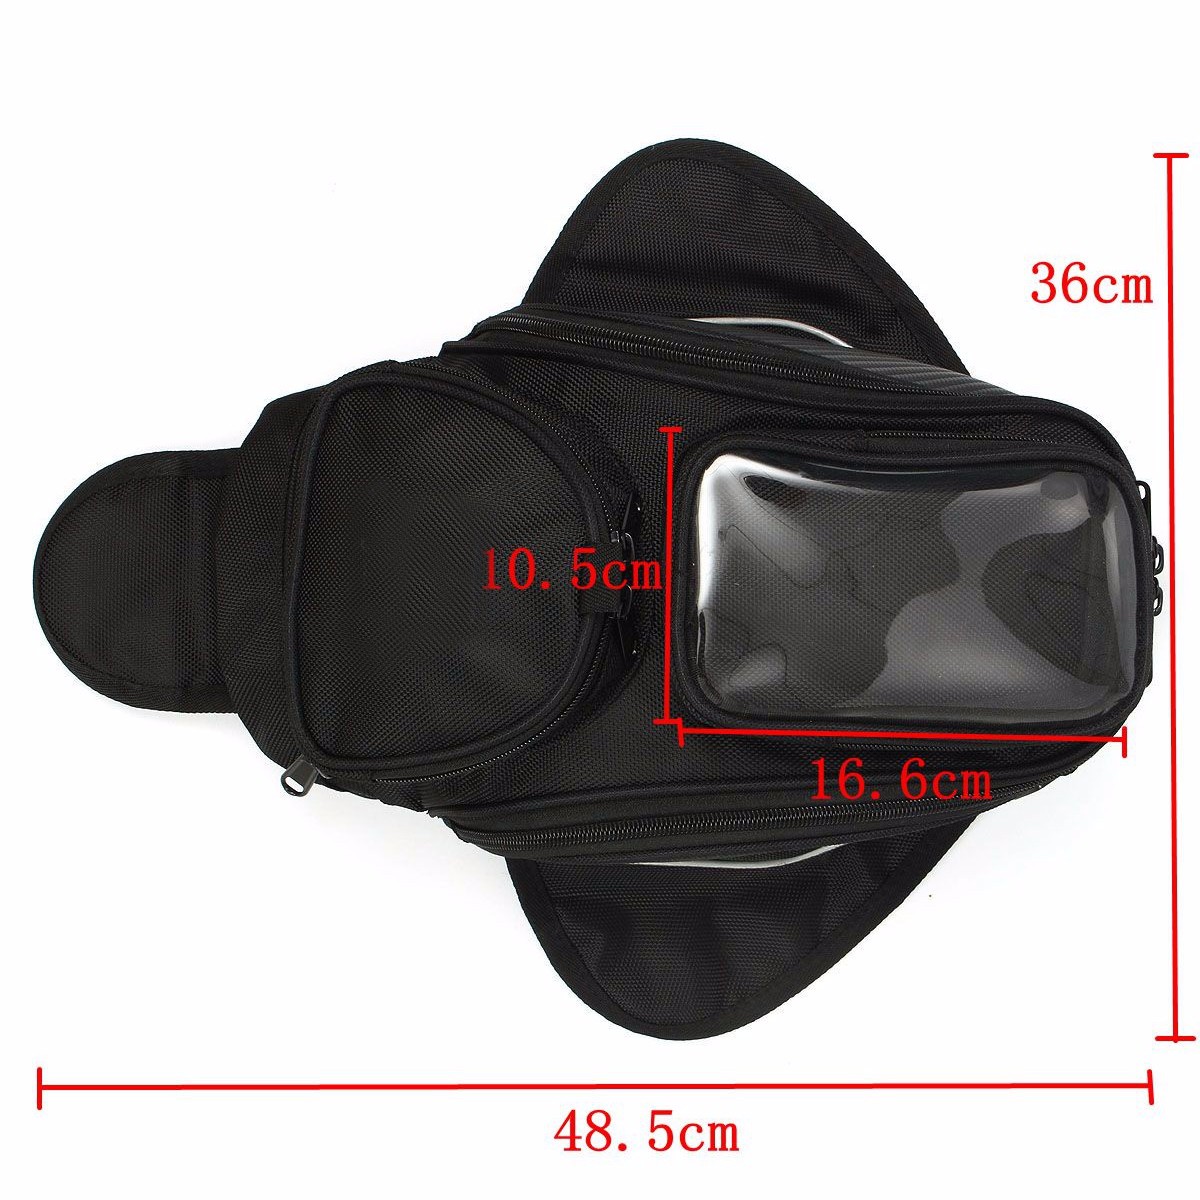 Motorcycle Oil Fuel Tank Bag Magnetic Saddle Bag with Bigger Phone Window 36x48.5cm